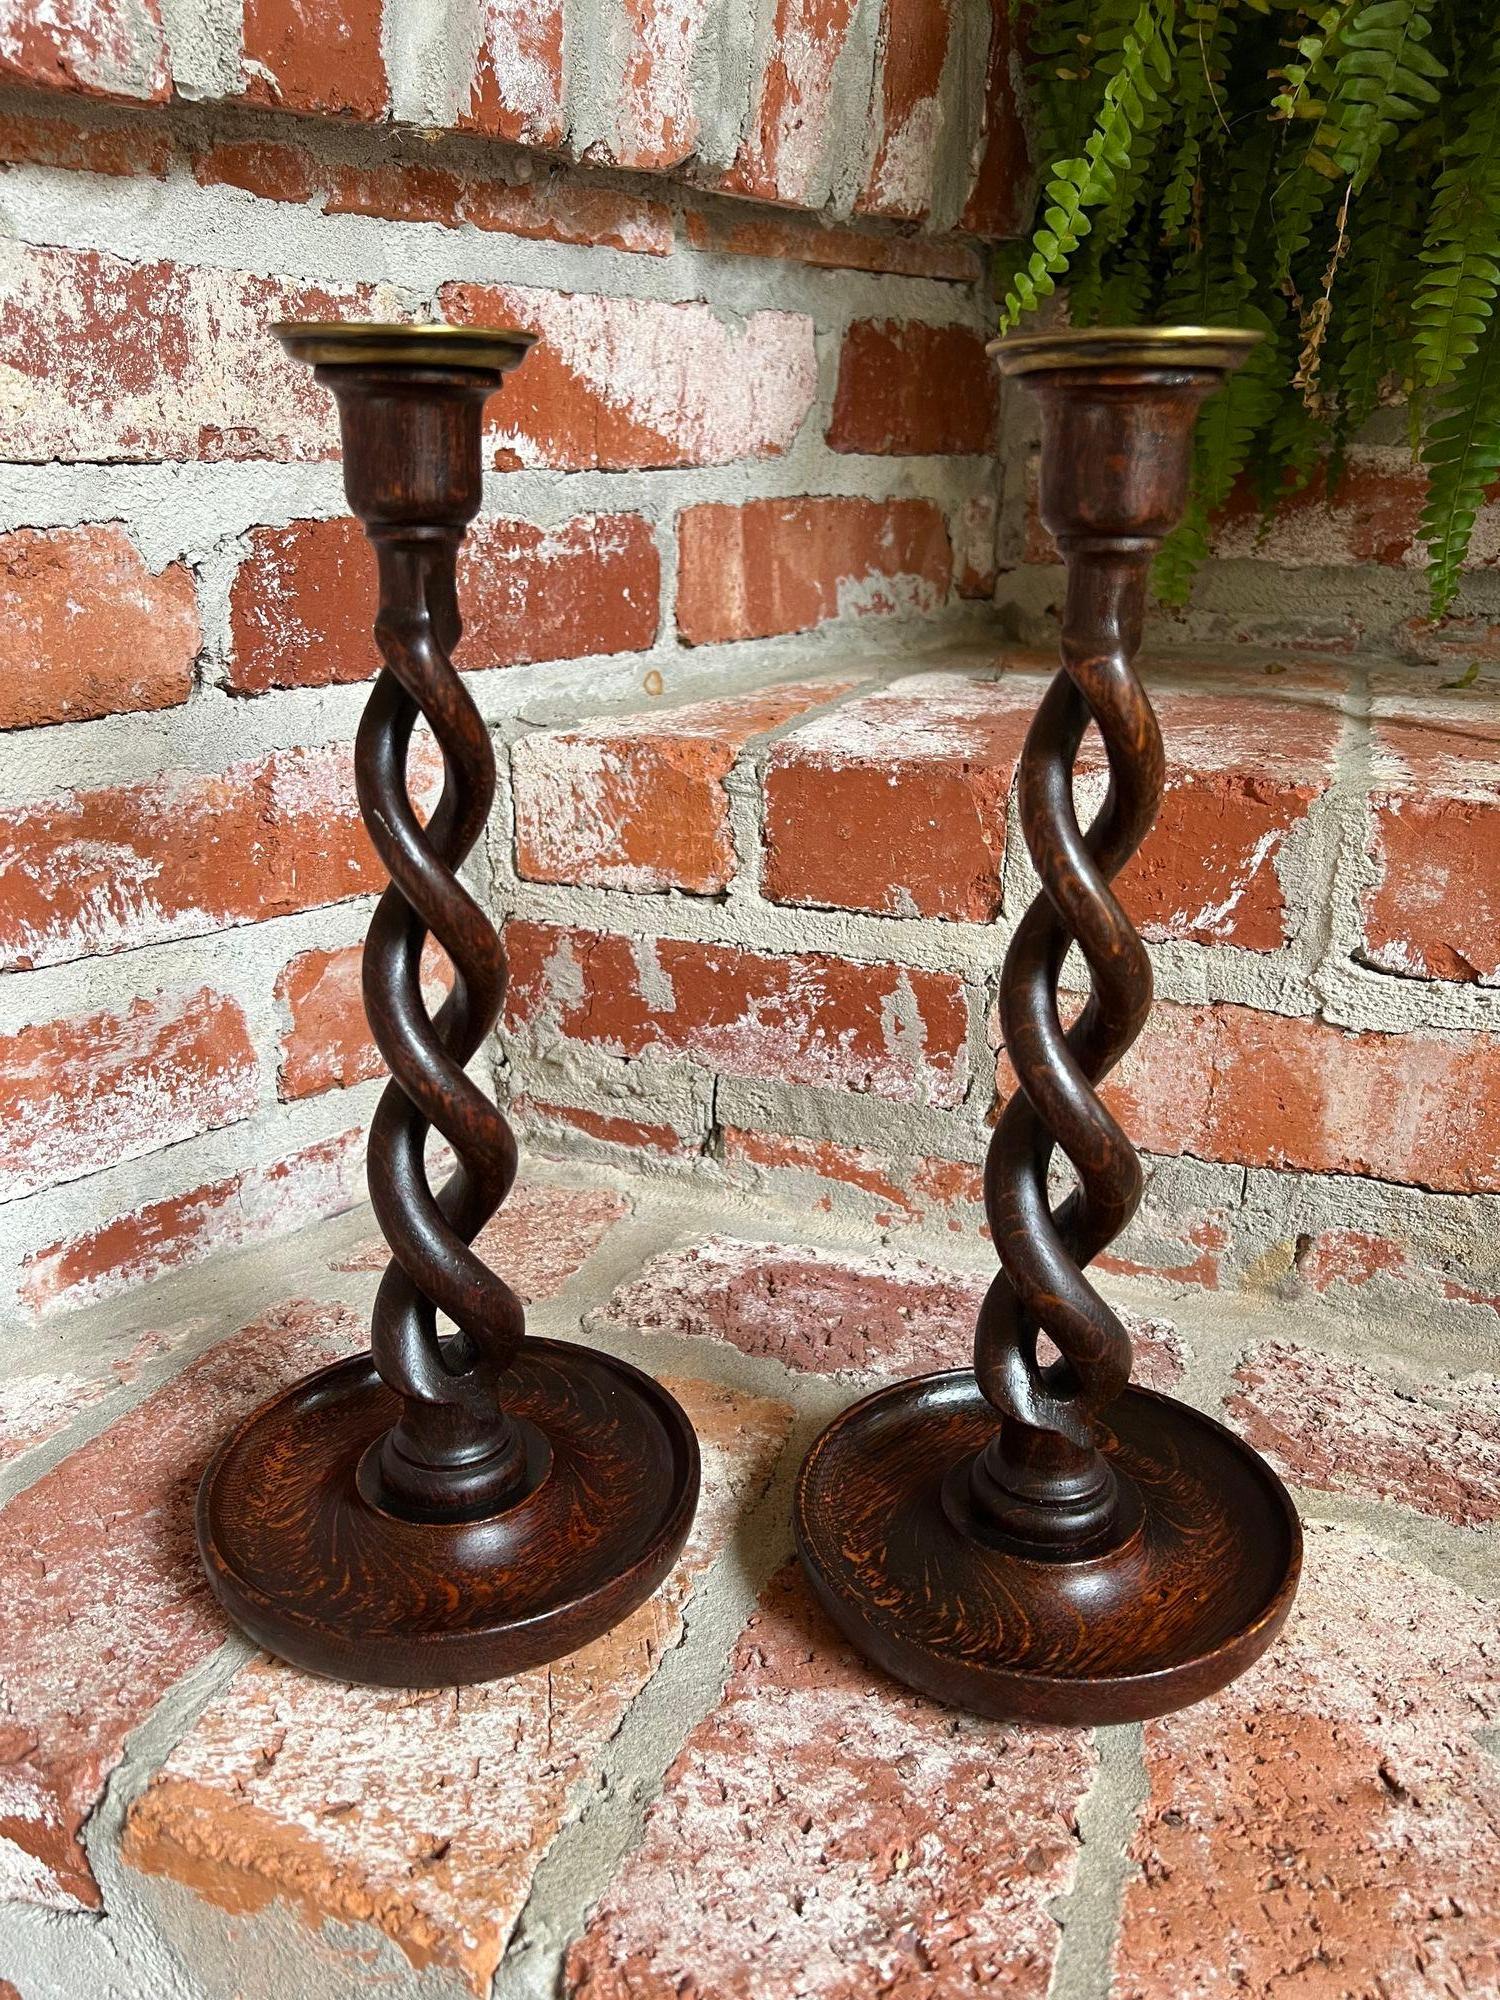 PAIR Set Antique English Oak OPEN Barley Twist Candlesticks Candle Holder Brass Bobeche.

Direct from England, a stunning pair of antique English oak barley twist candlesticks! These are the “open barley twist” design, highly sought after and hard